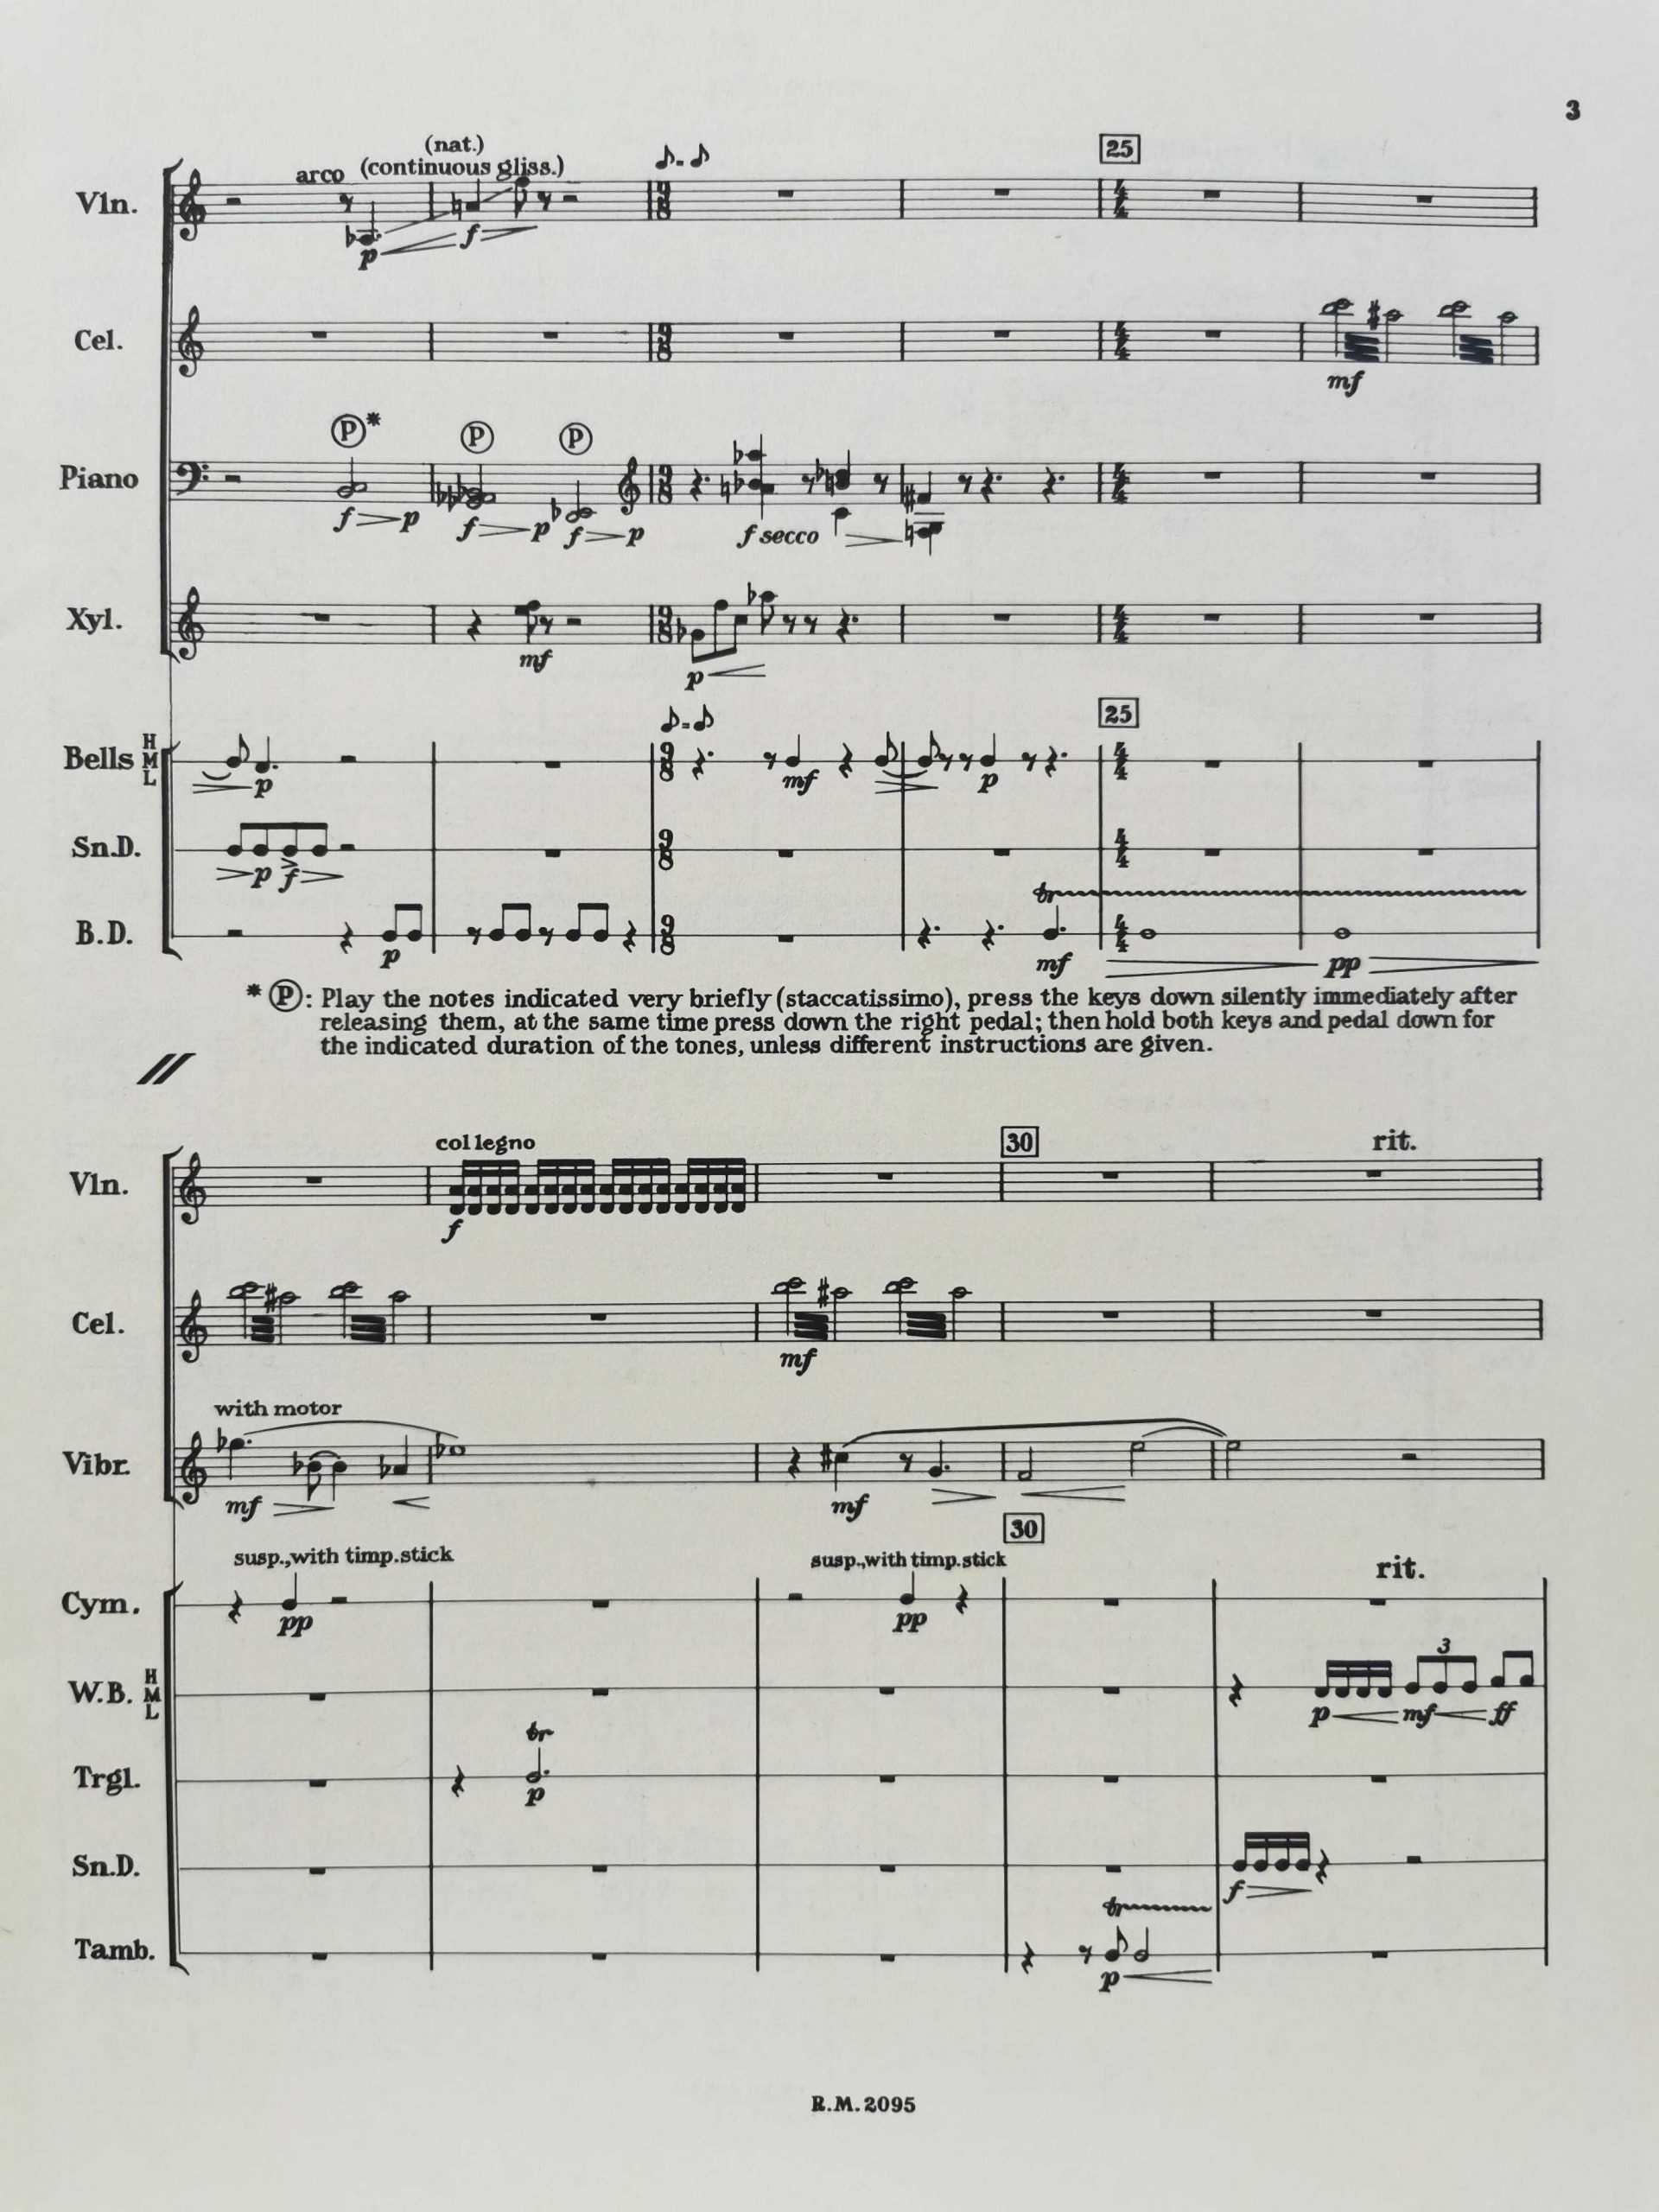 Marginal Sounds For percussion instruments with violin by Ernst Krenek